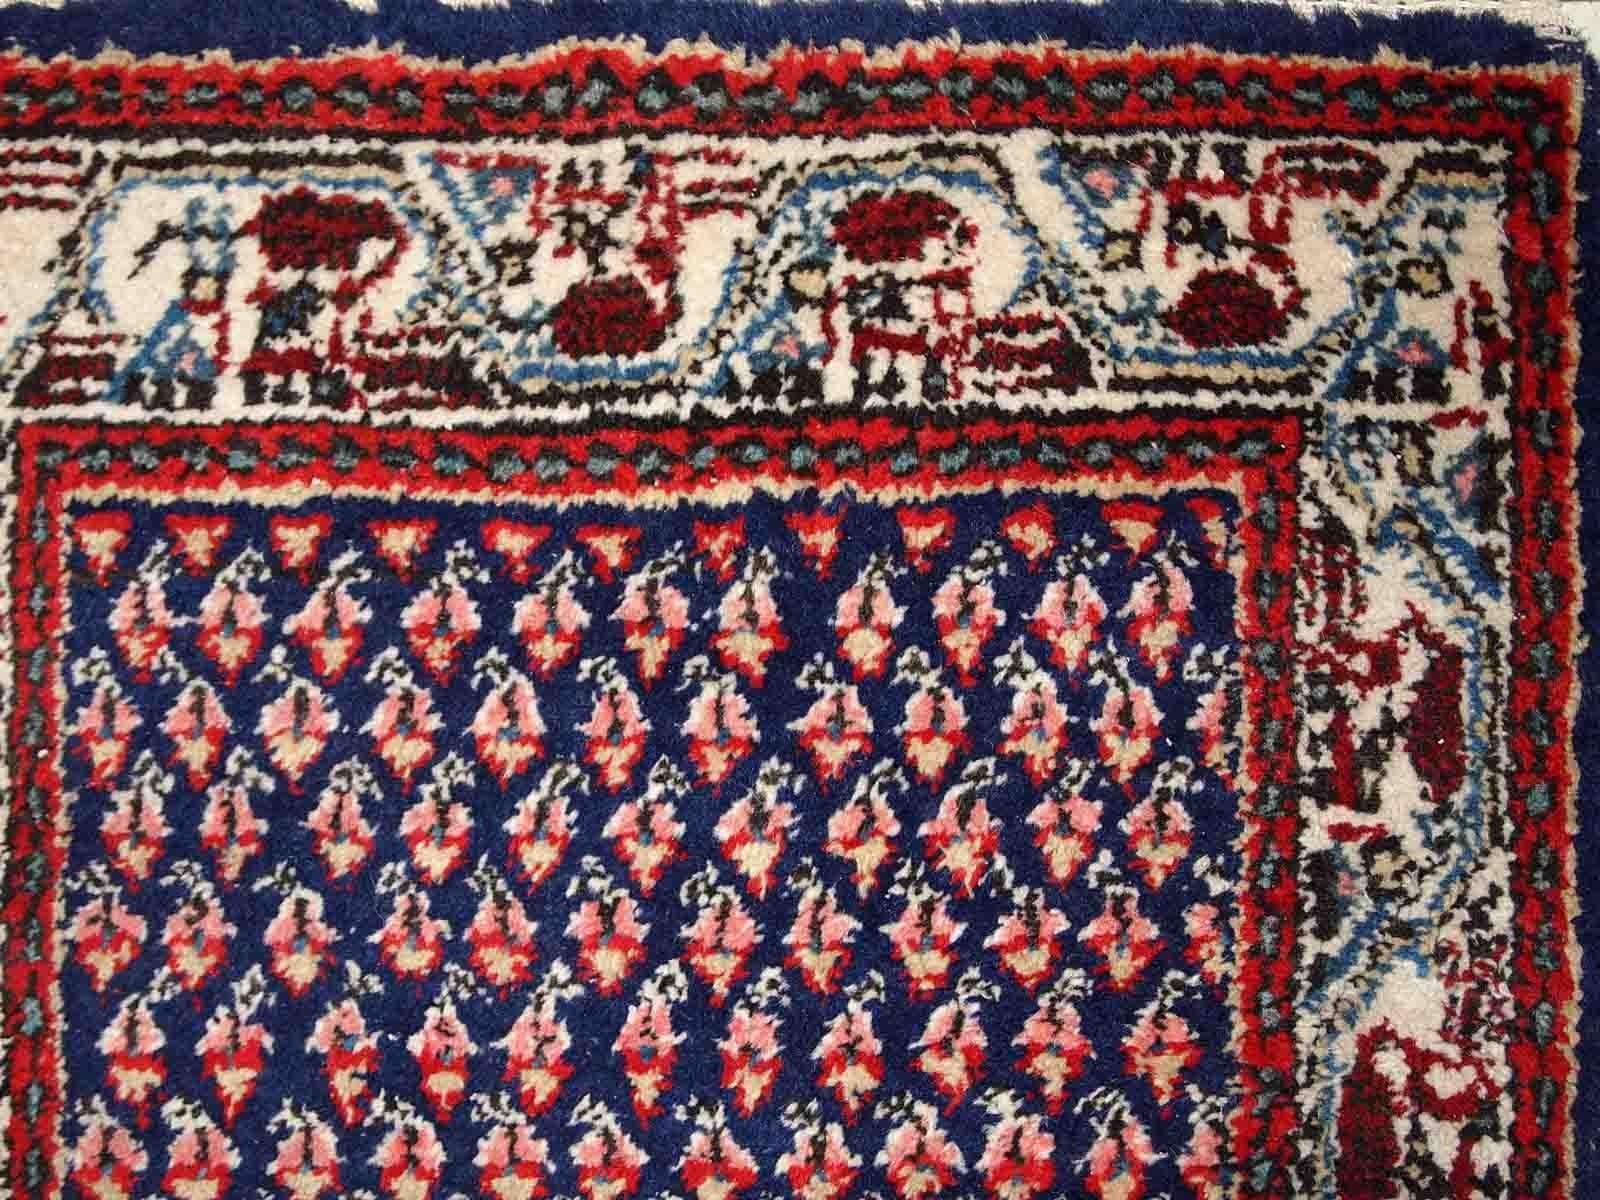 Handmade vintage Indian rug with Middle Eastern Seraband design. The rug is made in the end of 20th century, it is in original good condition.

-condition: origial good, 

-circa: 1970s,

-size: 2' x 4' (62cm x 124cm),
?
-material: